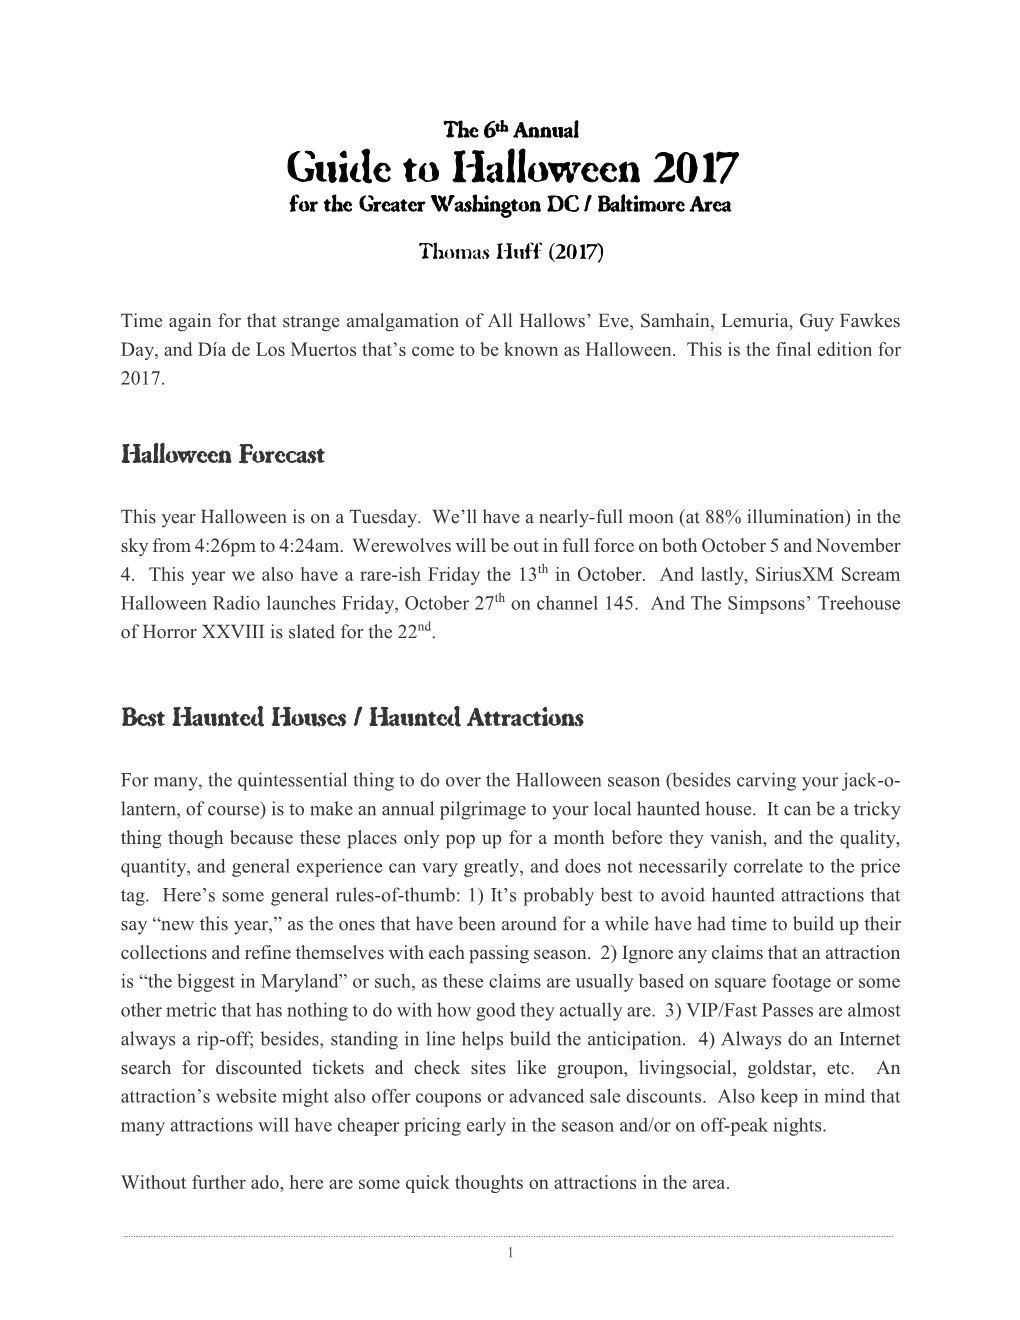 Guide to Halloween for DC and Baltimore